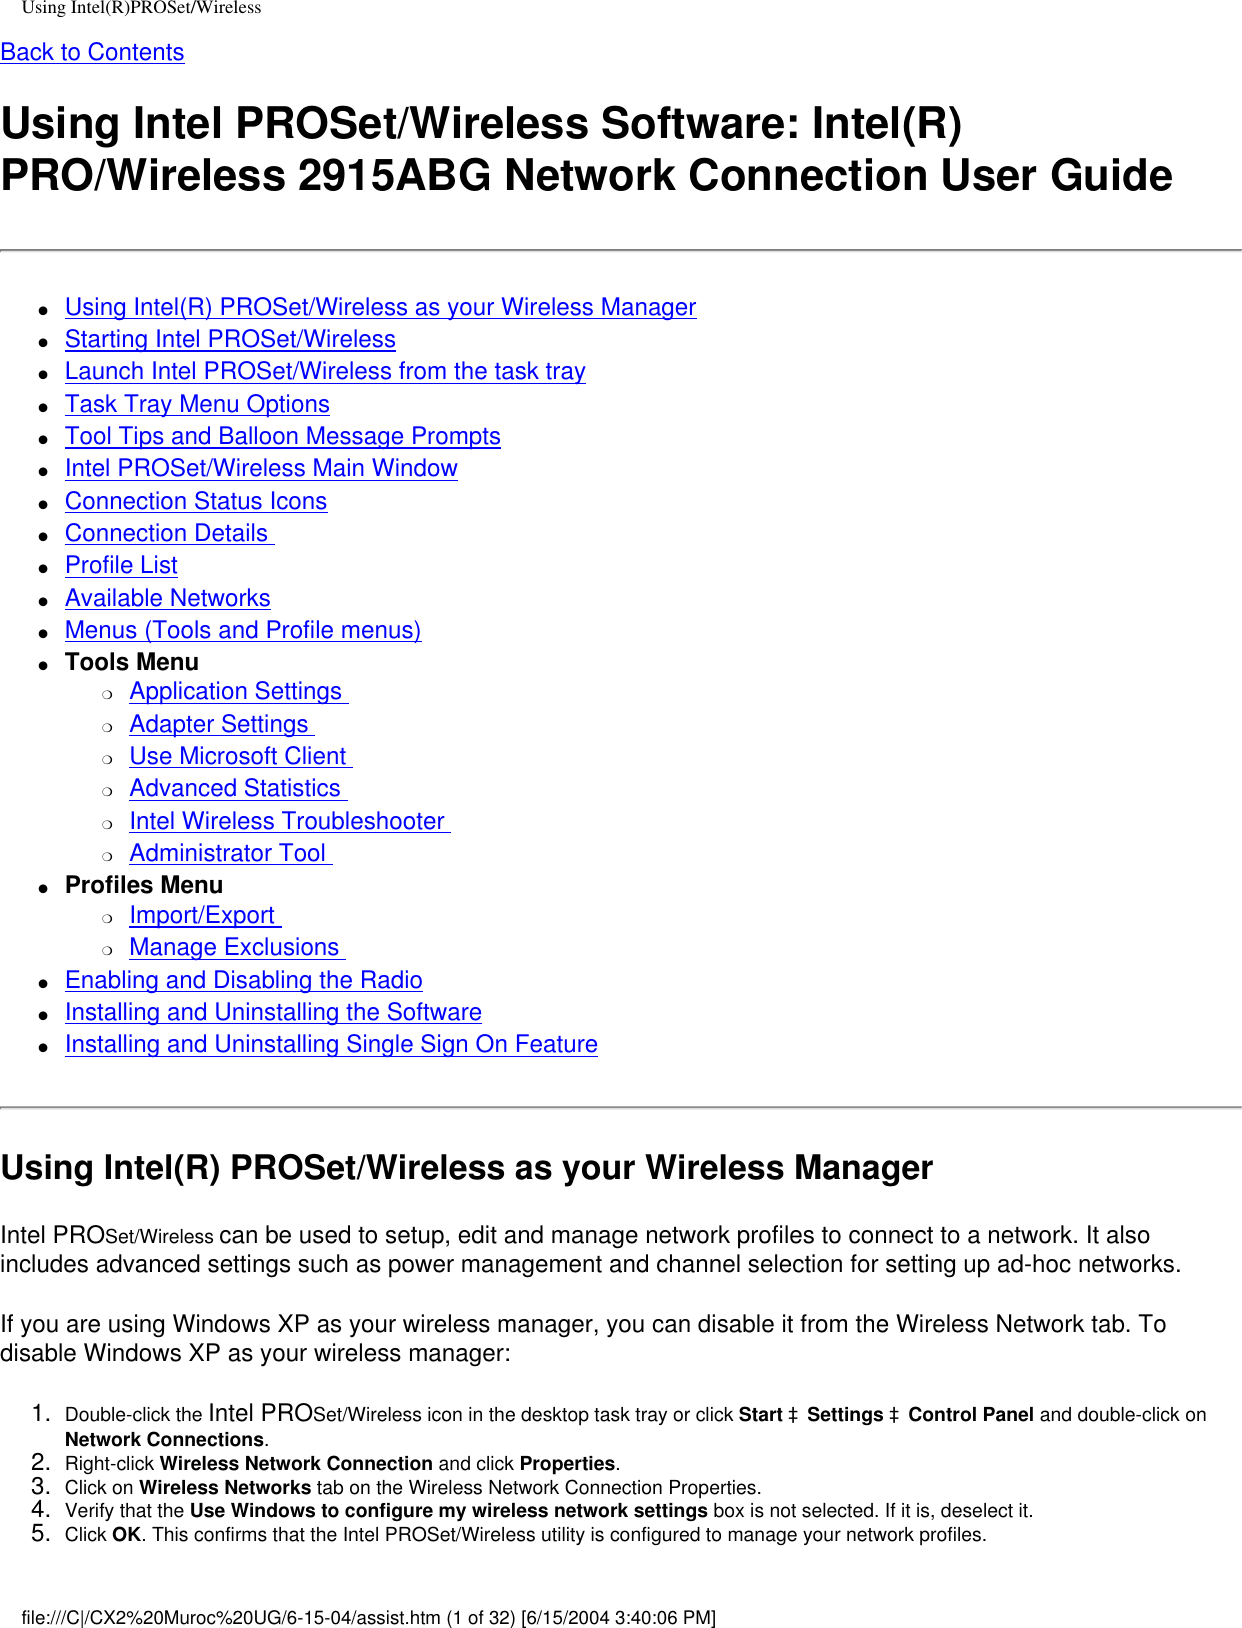 Using Intel(R)PROSet/WirelessBack to ContentsUsing Intel PROSet/Wireless Software: Intel(R) PRO/Wireless 2915ABG Network Connection User Guide●     Using Intel(R) PROSet/Wireless as your Wireless Manager●     Starting Intel PROSet/Wireless●     Launch Intel PROSet/Wireless from the task tray●     Task Tray Menu Options●     Tool Tips and Balloon Message Prompts●     Intel PROSet/Wireless Main Window●     Connection Status Icons●     Connection Details ●     Profile List●     Available Networks●     Menus (Tools and Profile menus)●     Tools Menu❍     Application Settings ❍     Adapter Settings ❍     Use Microsoft Client ❍     Advanced Statistics ❍     Intel Wireless Troubleshooter ❍     Administrator Tool ●     Profiles Menu ❍     Import/Export ❍     Manage Exclusions ●     Enabling and Disabling the Radio●     Installing and Uninstalling the Software ●     Installing and Uninstalling Single Sign On Feature Using Intel(R) PROSet/Wireless as your Wireless ManagerIntel PROSet/Wireless can be used to setup, edit and manage network profiles to connect to a network. It also includes advanced settings such as power management and channel selection for setting up ad-hoc networks.  If you are using Windows XP as your wireless manager, you can disable it from the Wireless Network tab. To disable Windows XP as your wireless manager: 1.  Double-click the Intel PROSet/Wireless icon in the desktop task tray or click Start àSettings àControl Panel and double-click on Network Connections.2.  Right-click Wireless Network Connection and click Properties. 3.  Click on Wireless Networks tab on the Wireless Network Connection Properties.4.  Verify that the Use Windows to configure my wireless network settings box is not selected. If it is, deselect it.5.  Click OK. This confirms that the Intel PROSet/Wireless utility is configured to manage your network profiles.file:///C|/CX2%20Muroc%20UG/6-15-04/assist.htm (1 of 32) [6/15/2004 3:40:06 PM]